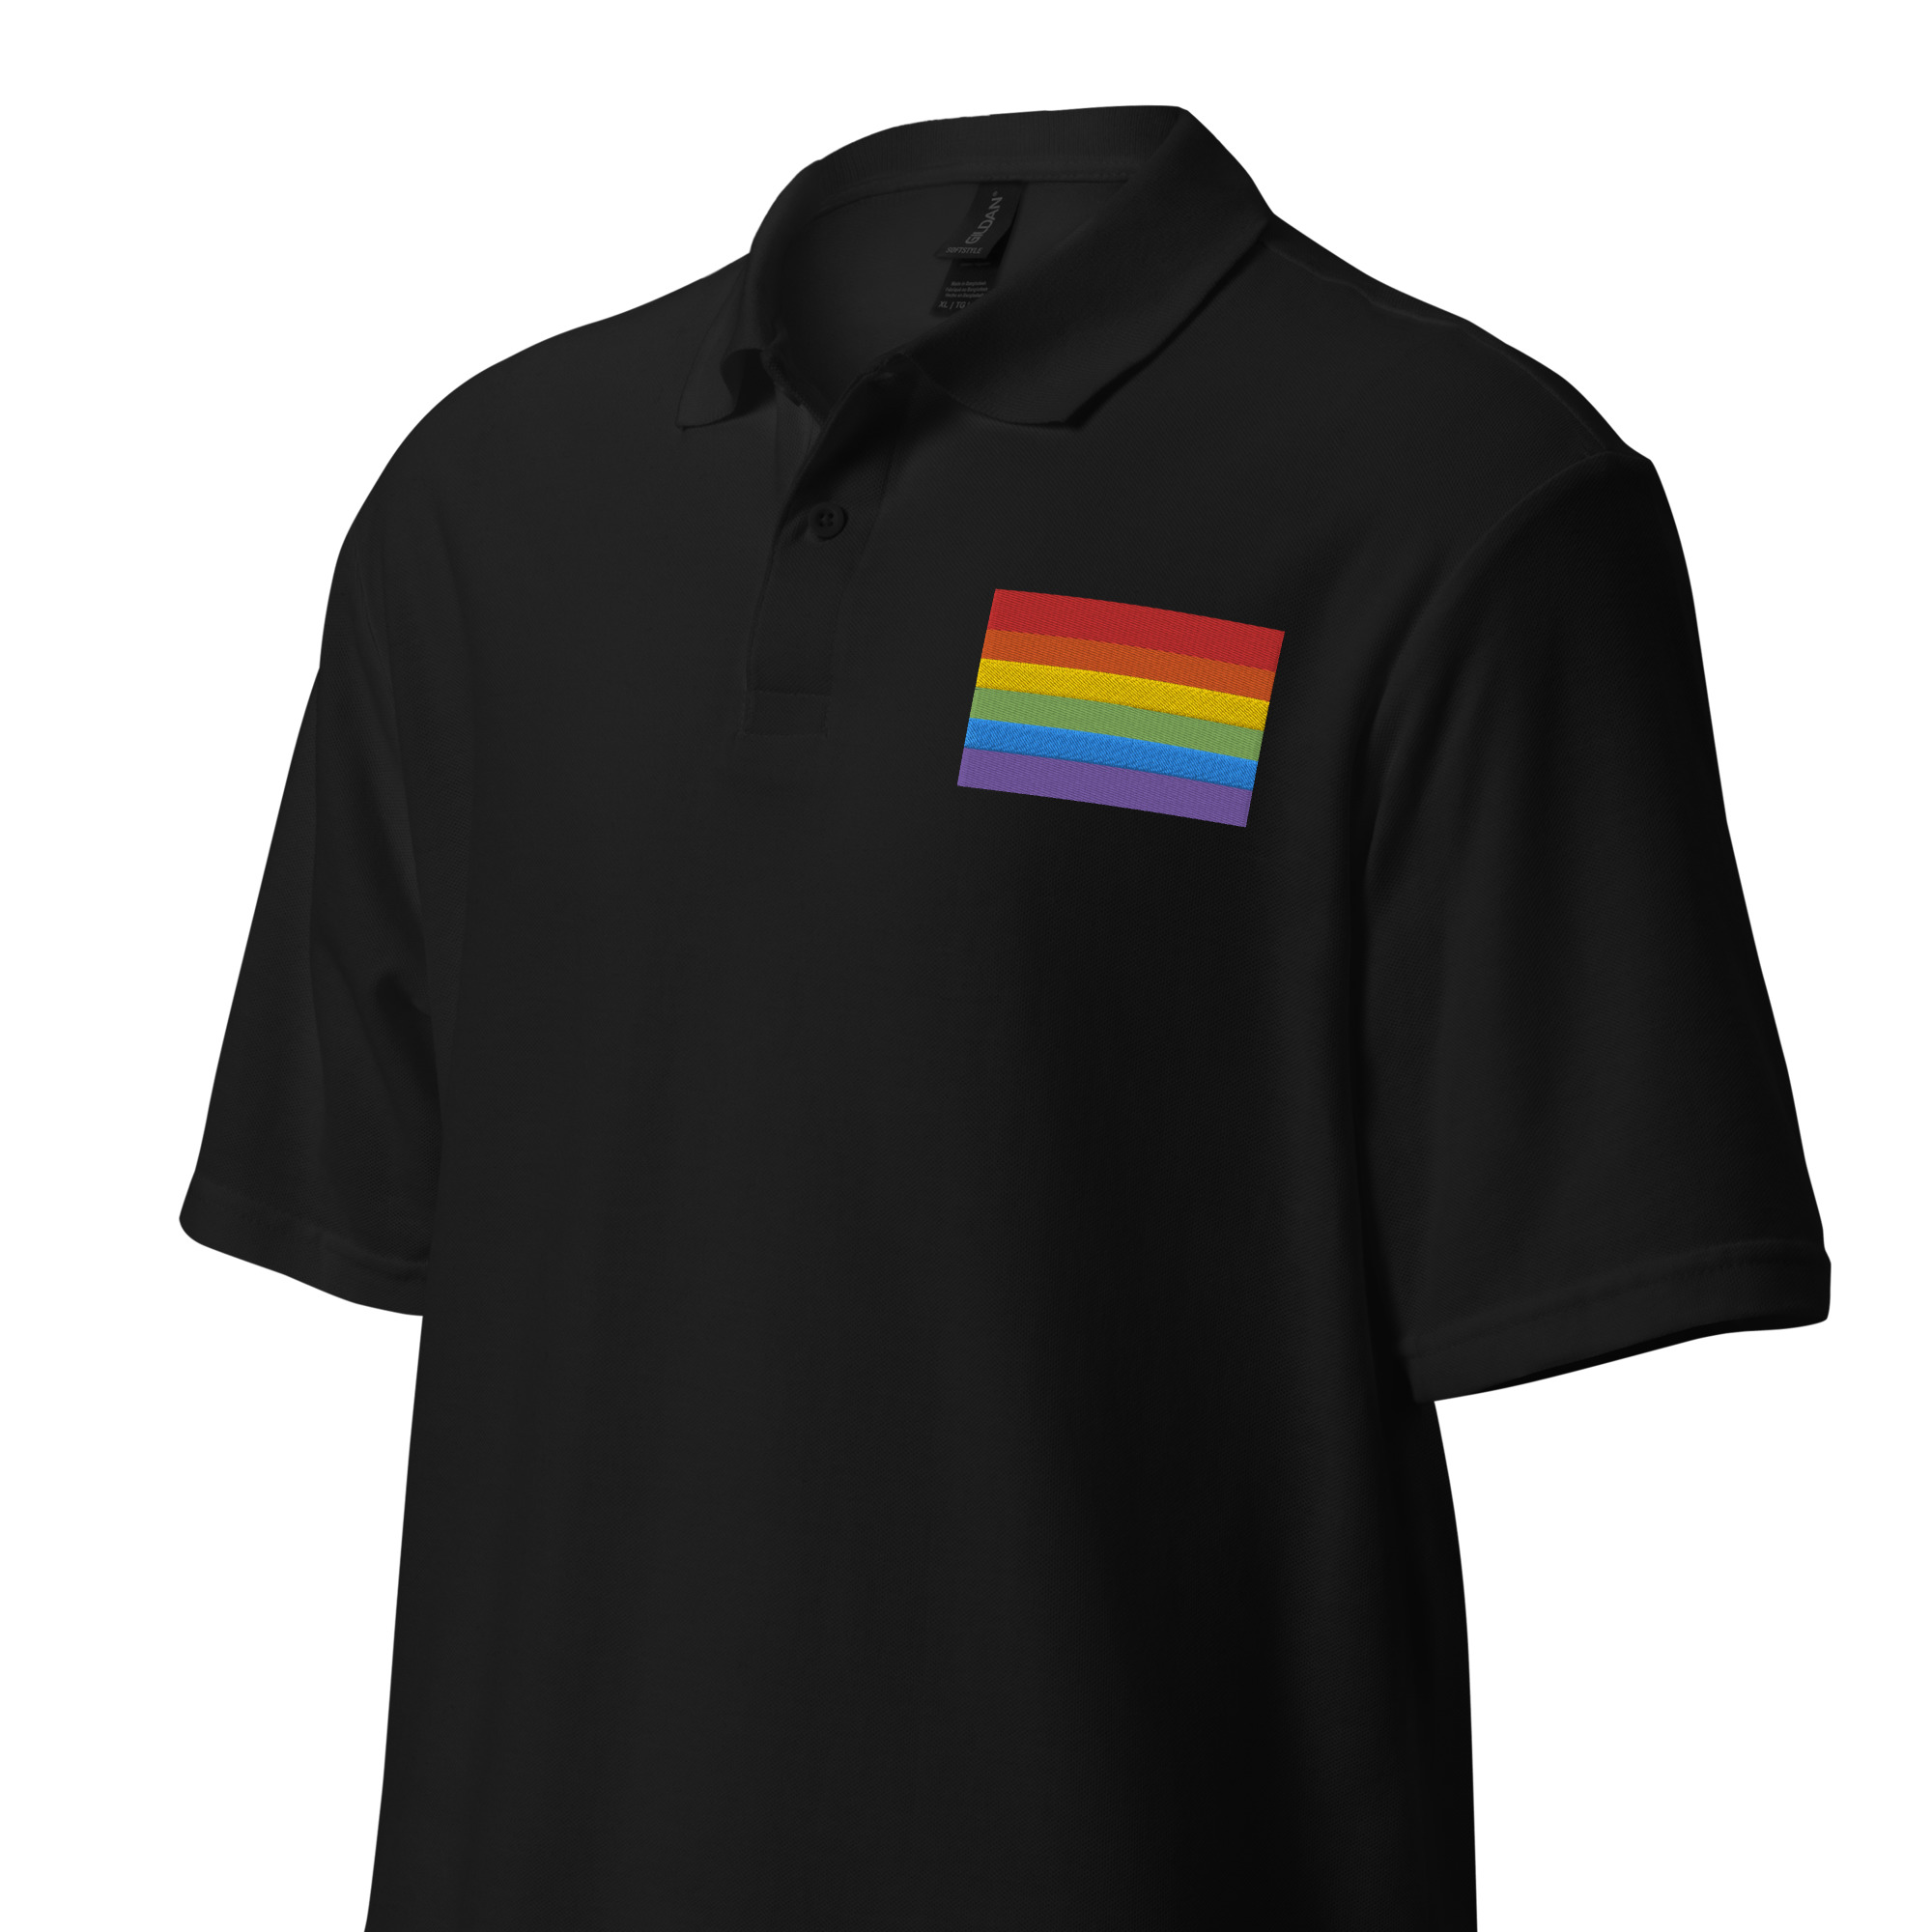 Featured image for “Gay pride Rainbow embroidered - Unisex pique polo shirt”